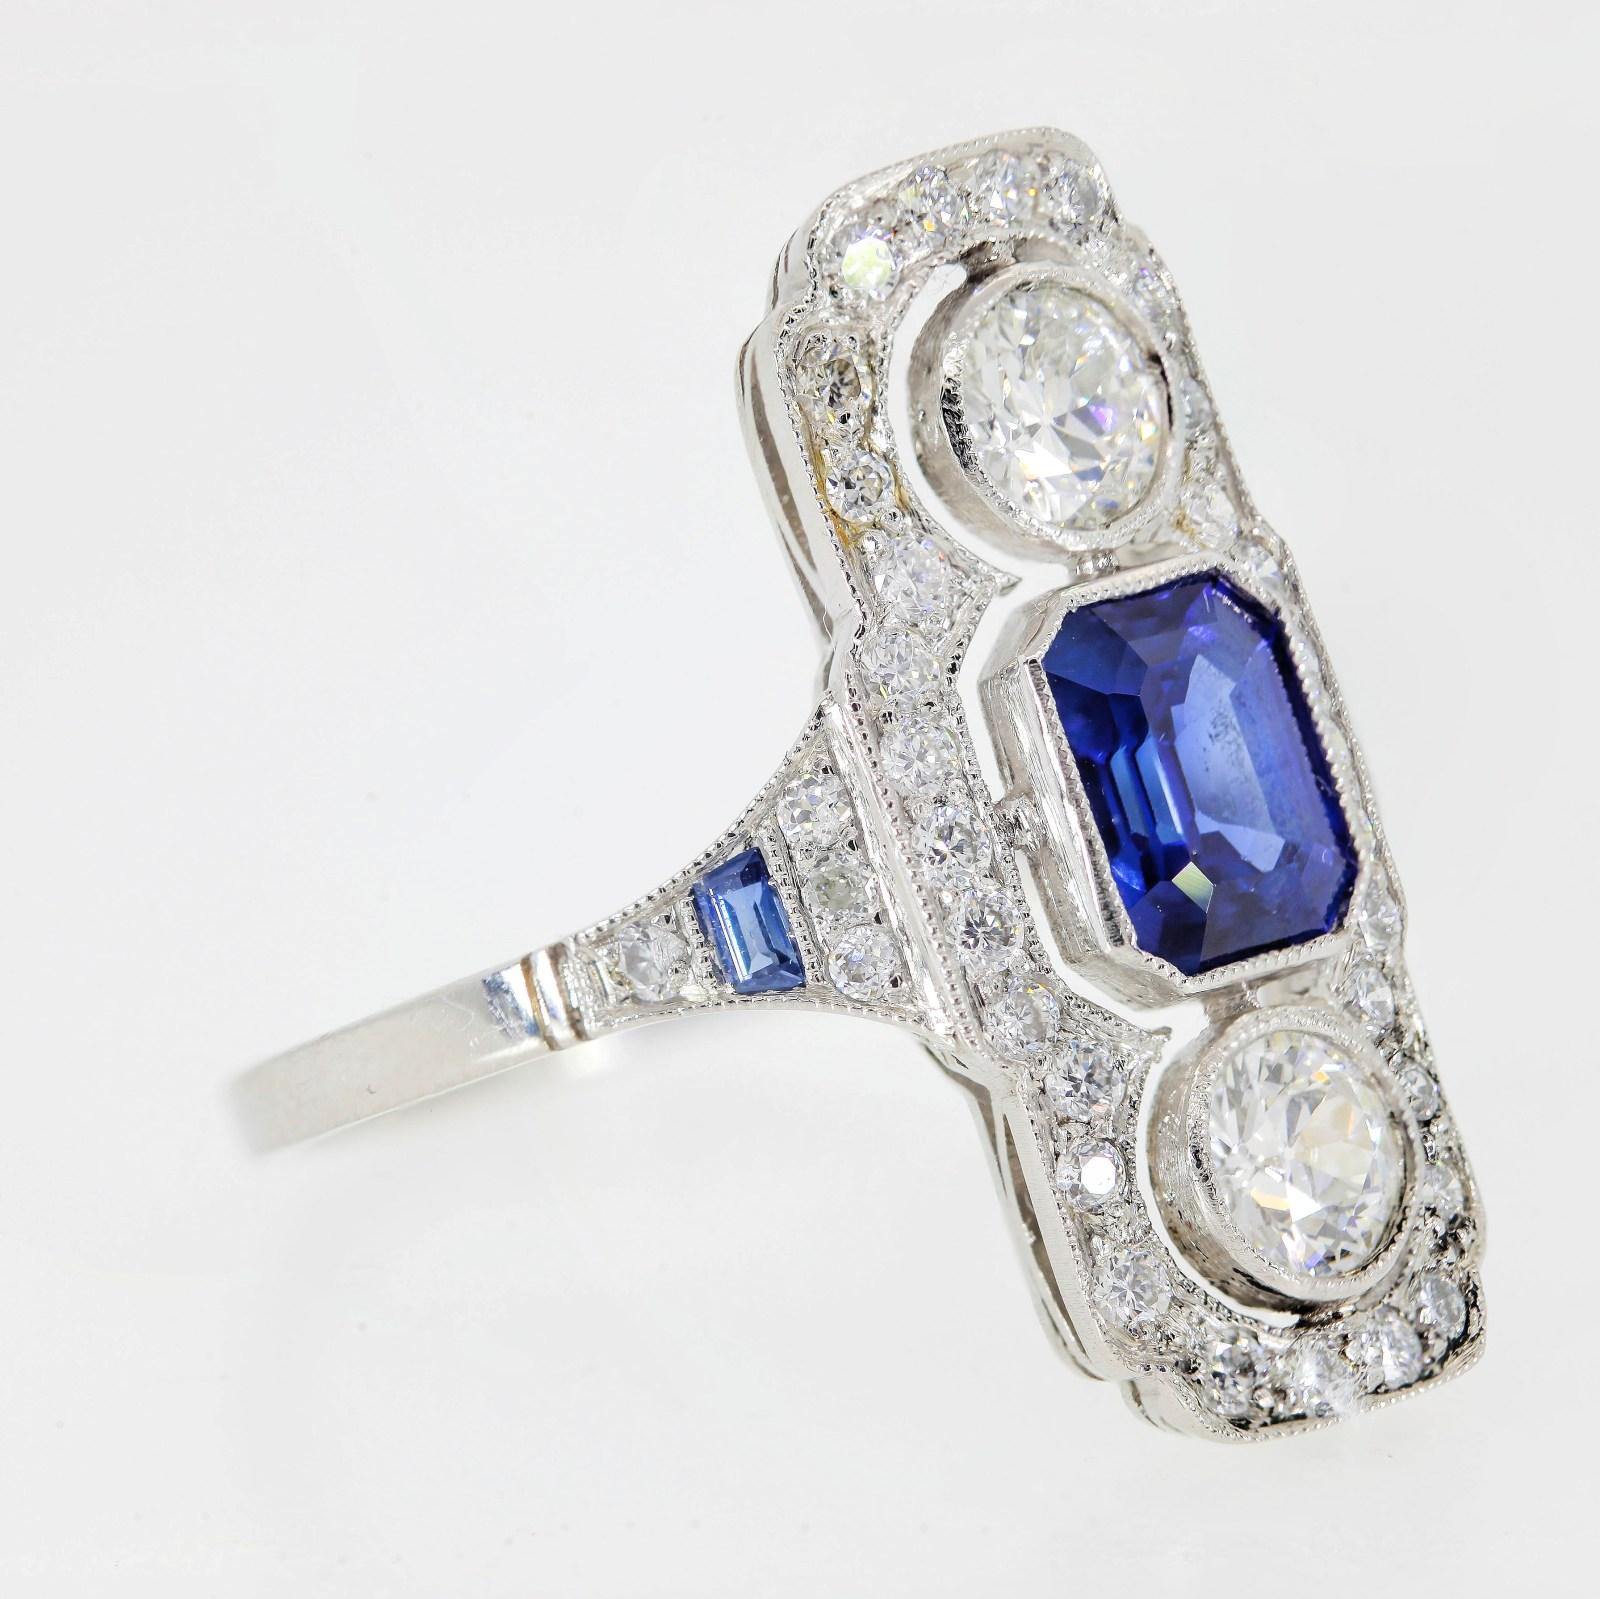 A hand crafted Art Deco style platinum that evokes the 1920s with its North/South design.  The 1.05 carats bright royal blue Ceylon Sapphire is flanked by two old cut natural diamonds.  All three bezel set stones are flanked by thirty Round